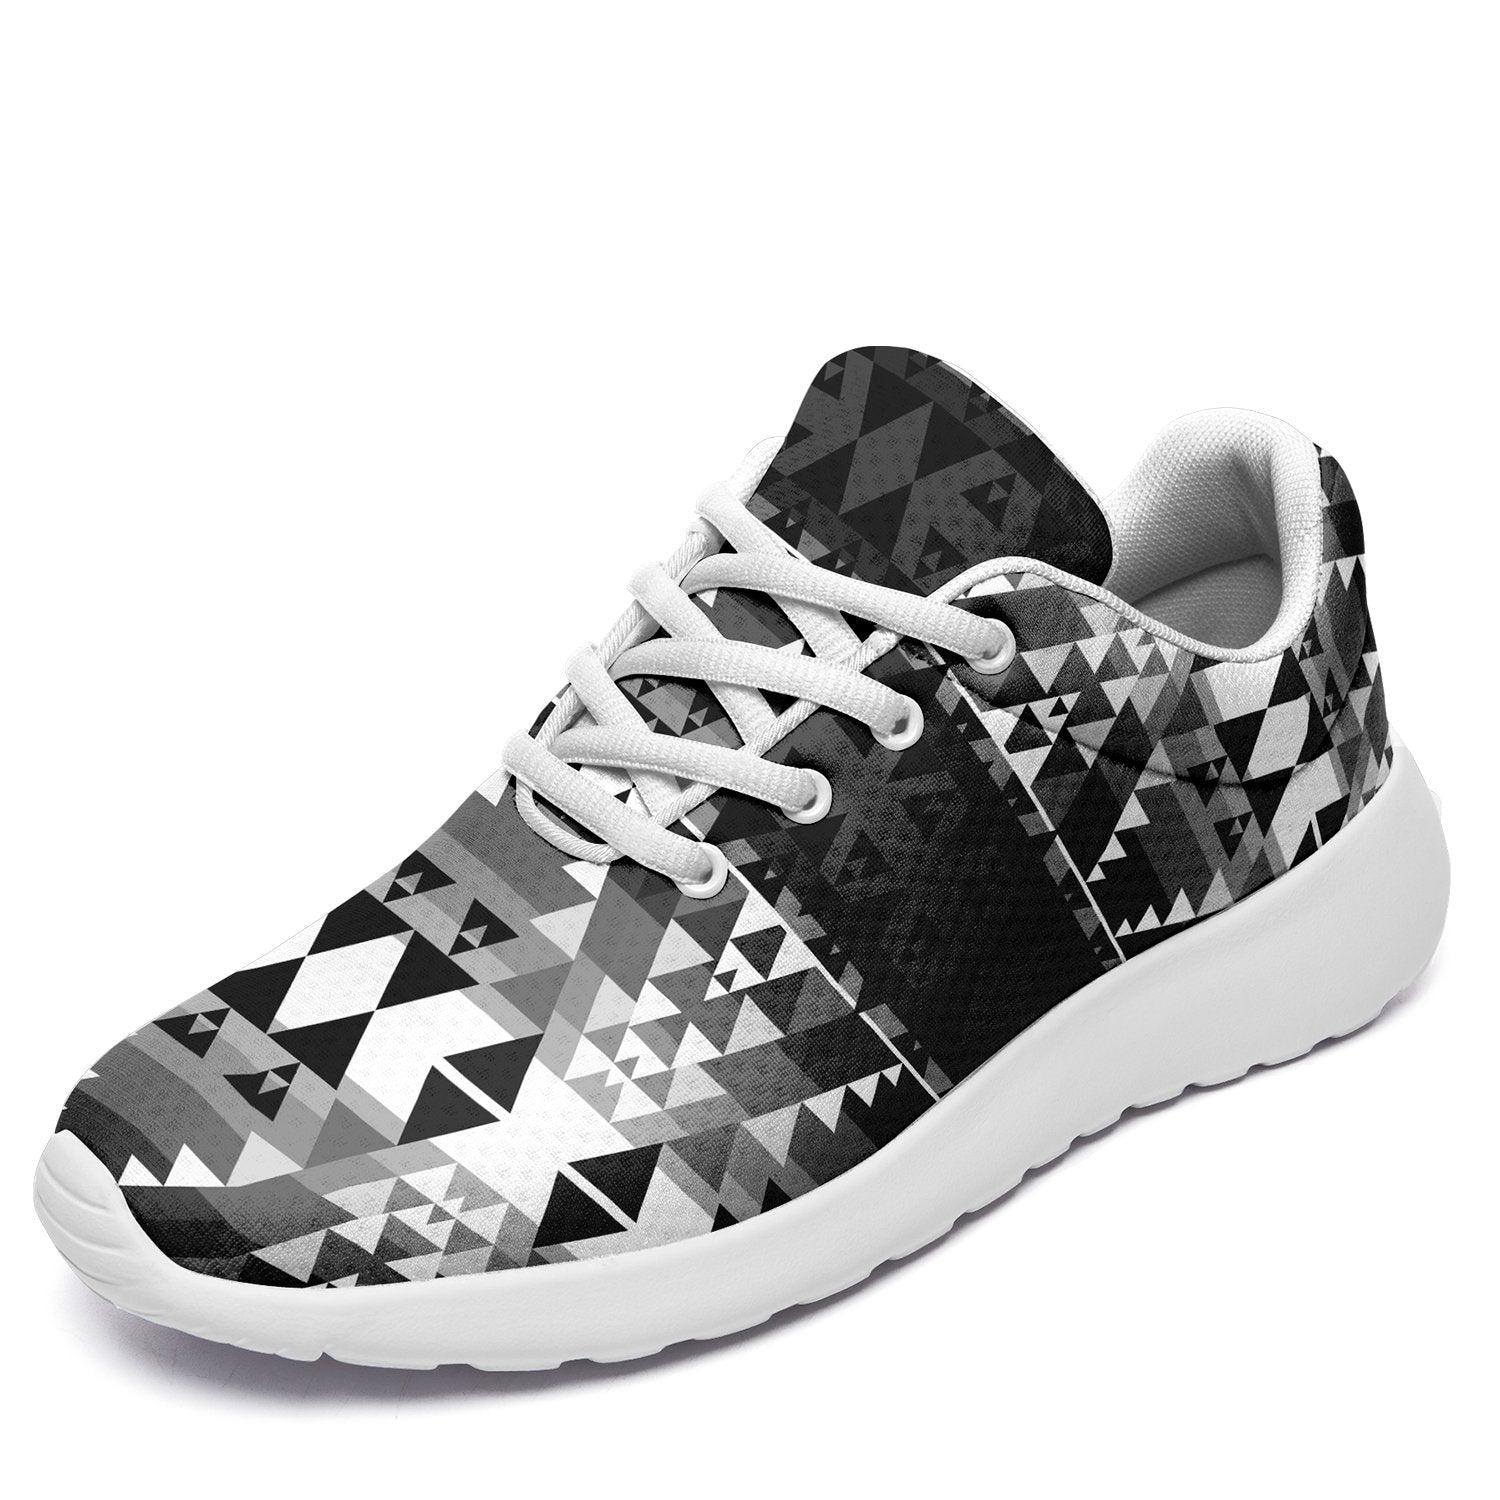 Writing on Stone Black and White Ikkaayi Sport Sneakers 49 Dzine US Women 4.5 / US Youth 3.5 / EUR 35 White Sole 